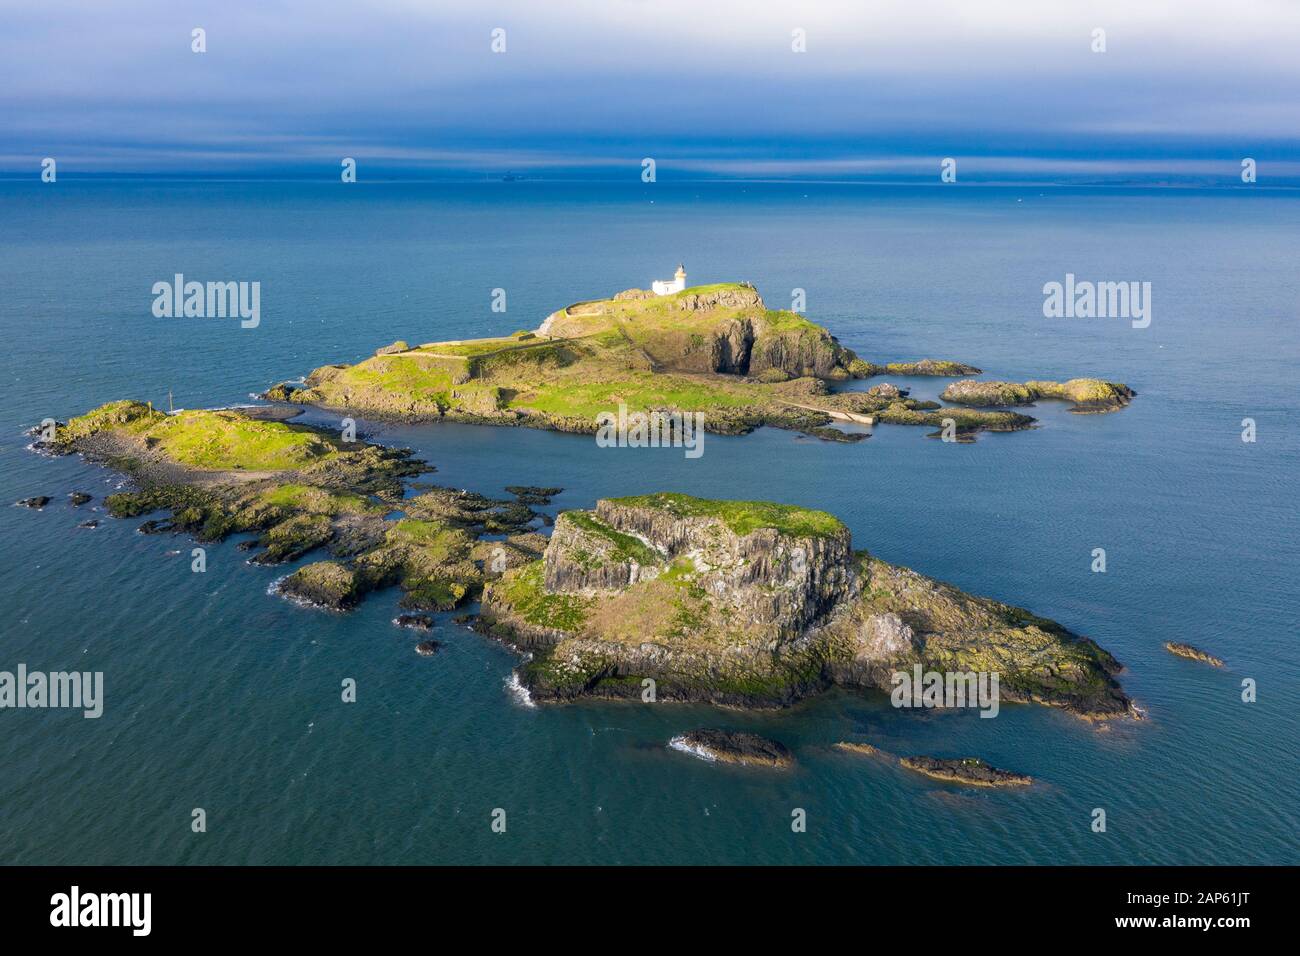 Aerial view of the Island of Fidra in the Firth of Forth off coast of East Lothian, Scotland, UK Stock Photo